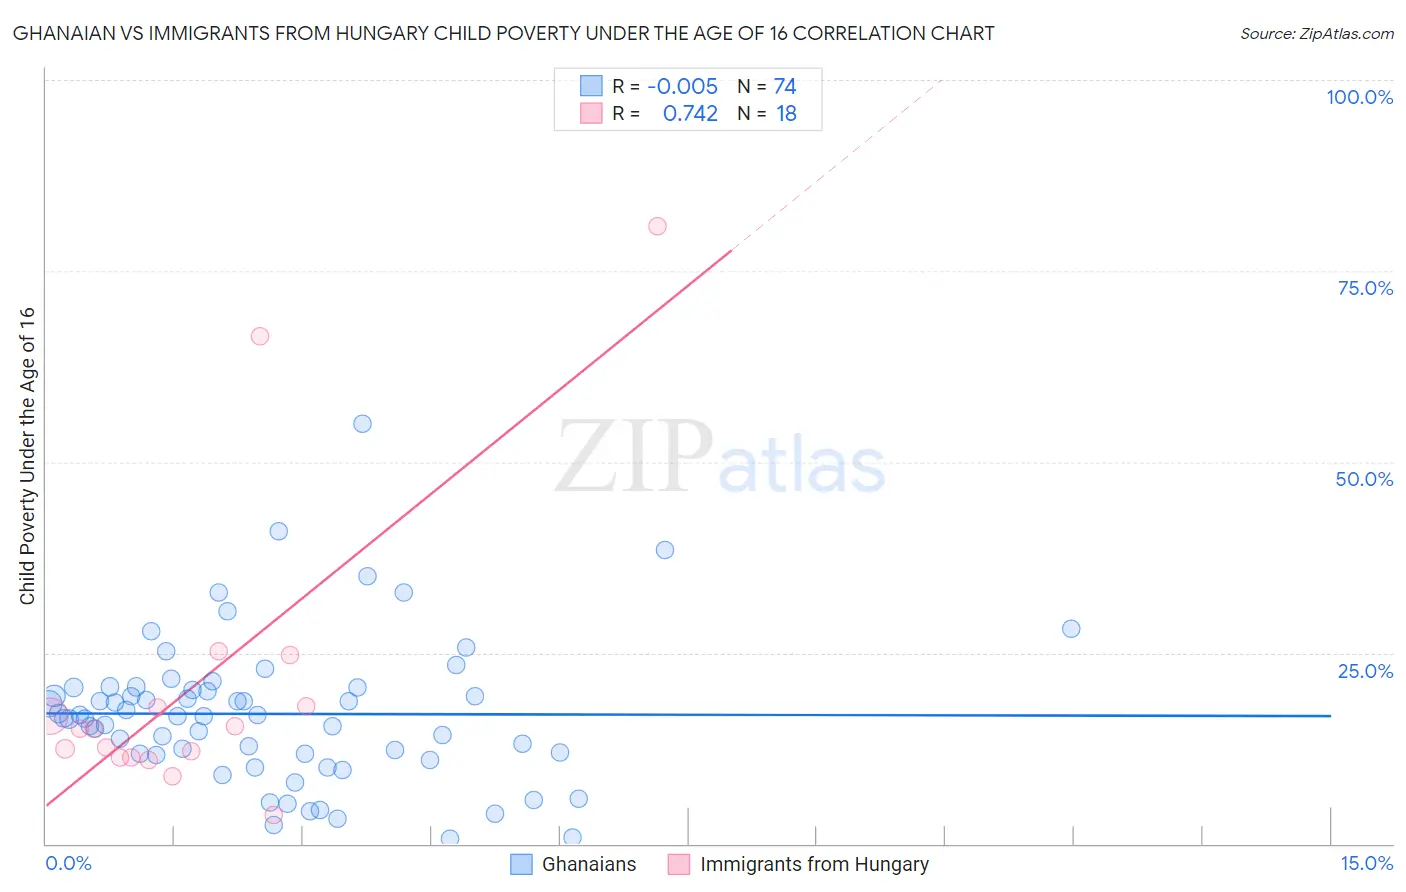 Ghanaian vs Immigrants from Hungary Child Poverty Under the Age of 16